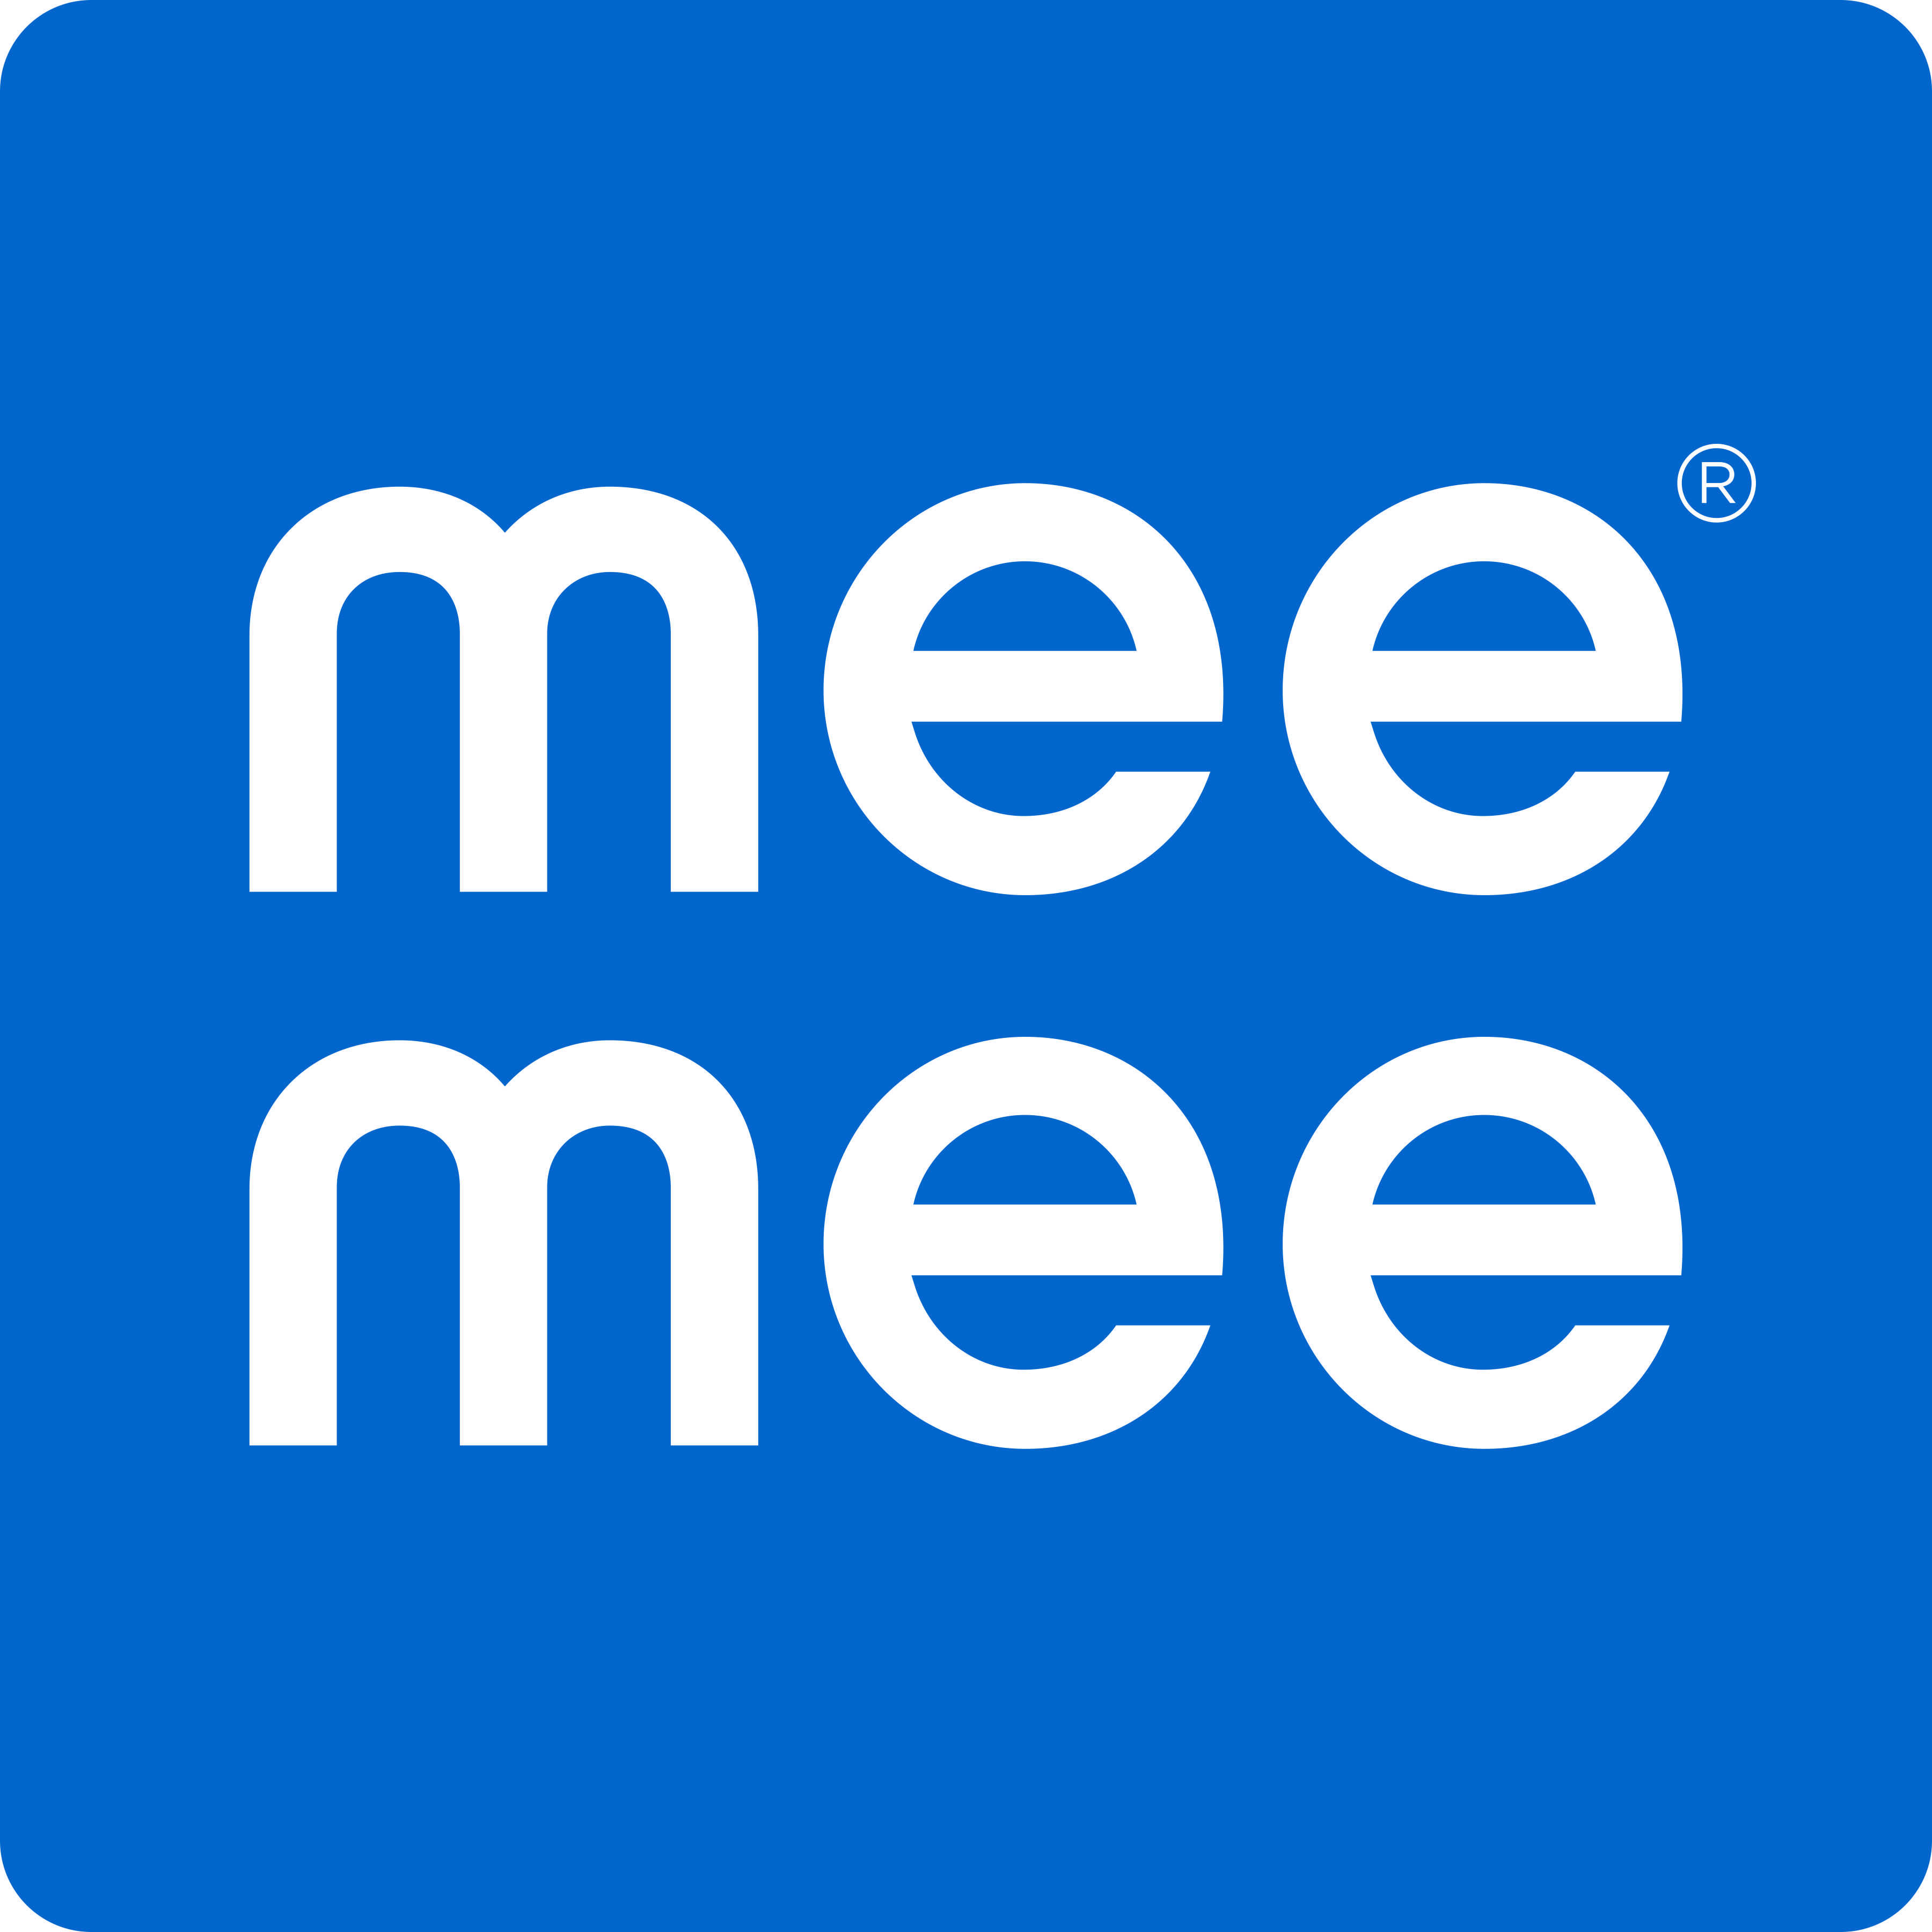 Parenting brand Mee Mee revamps its brand identity, Marketing